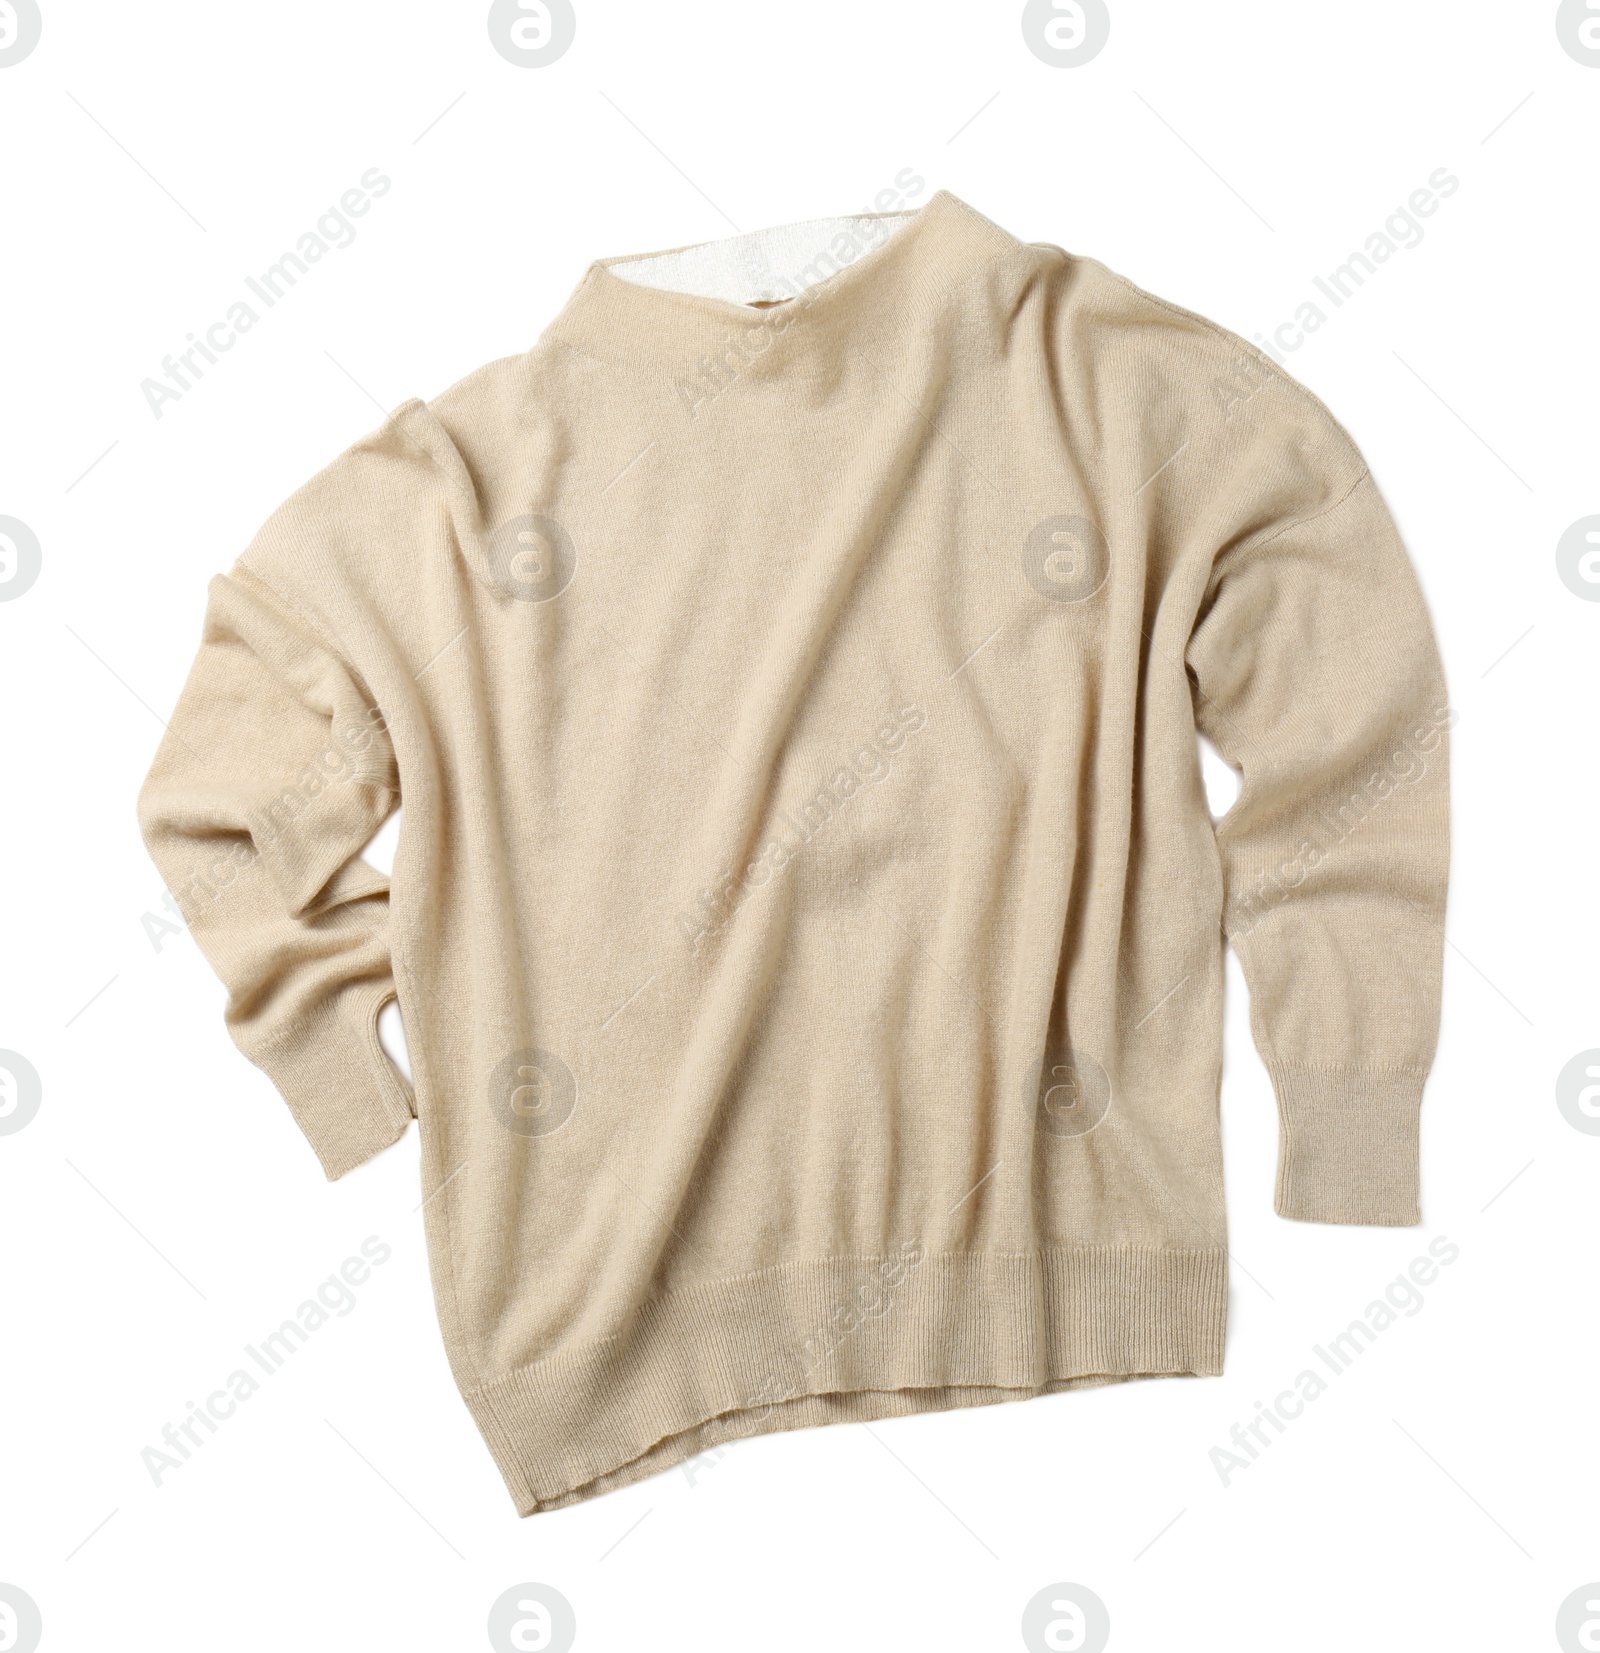 Photo of Cashmere sweater on white background, top view